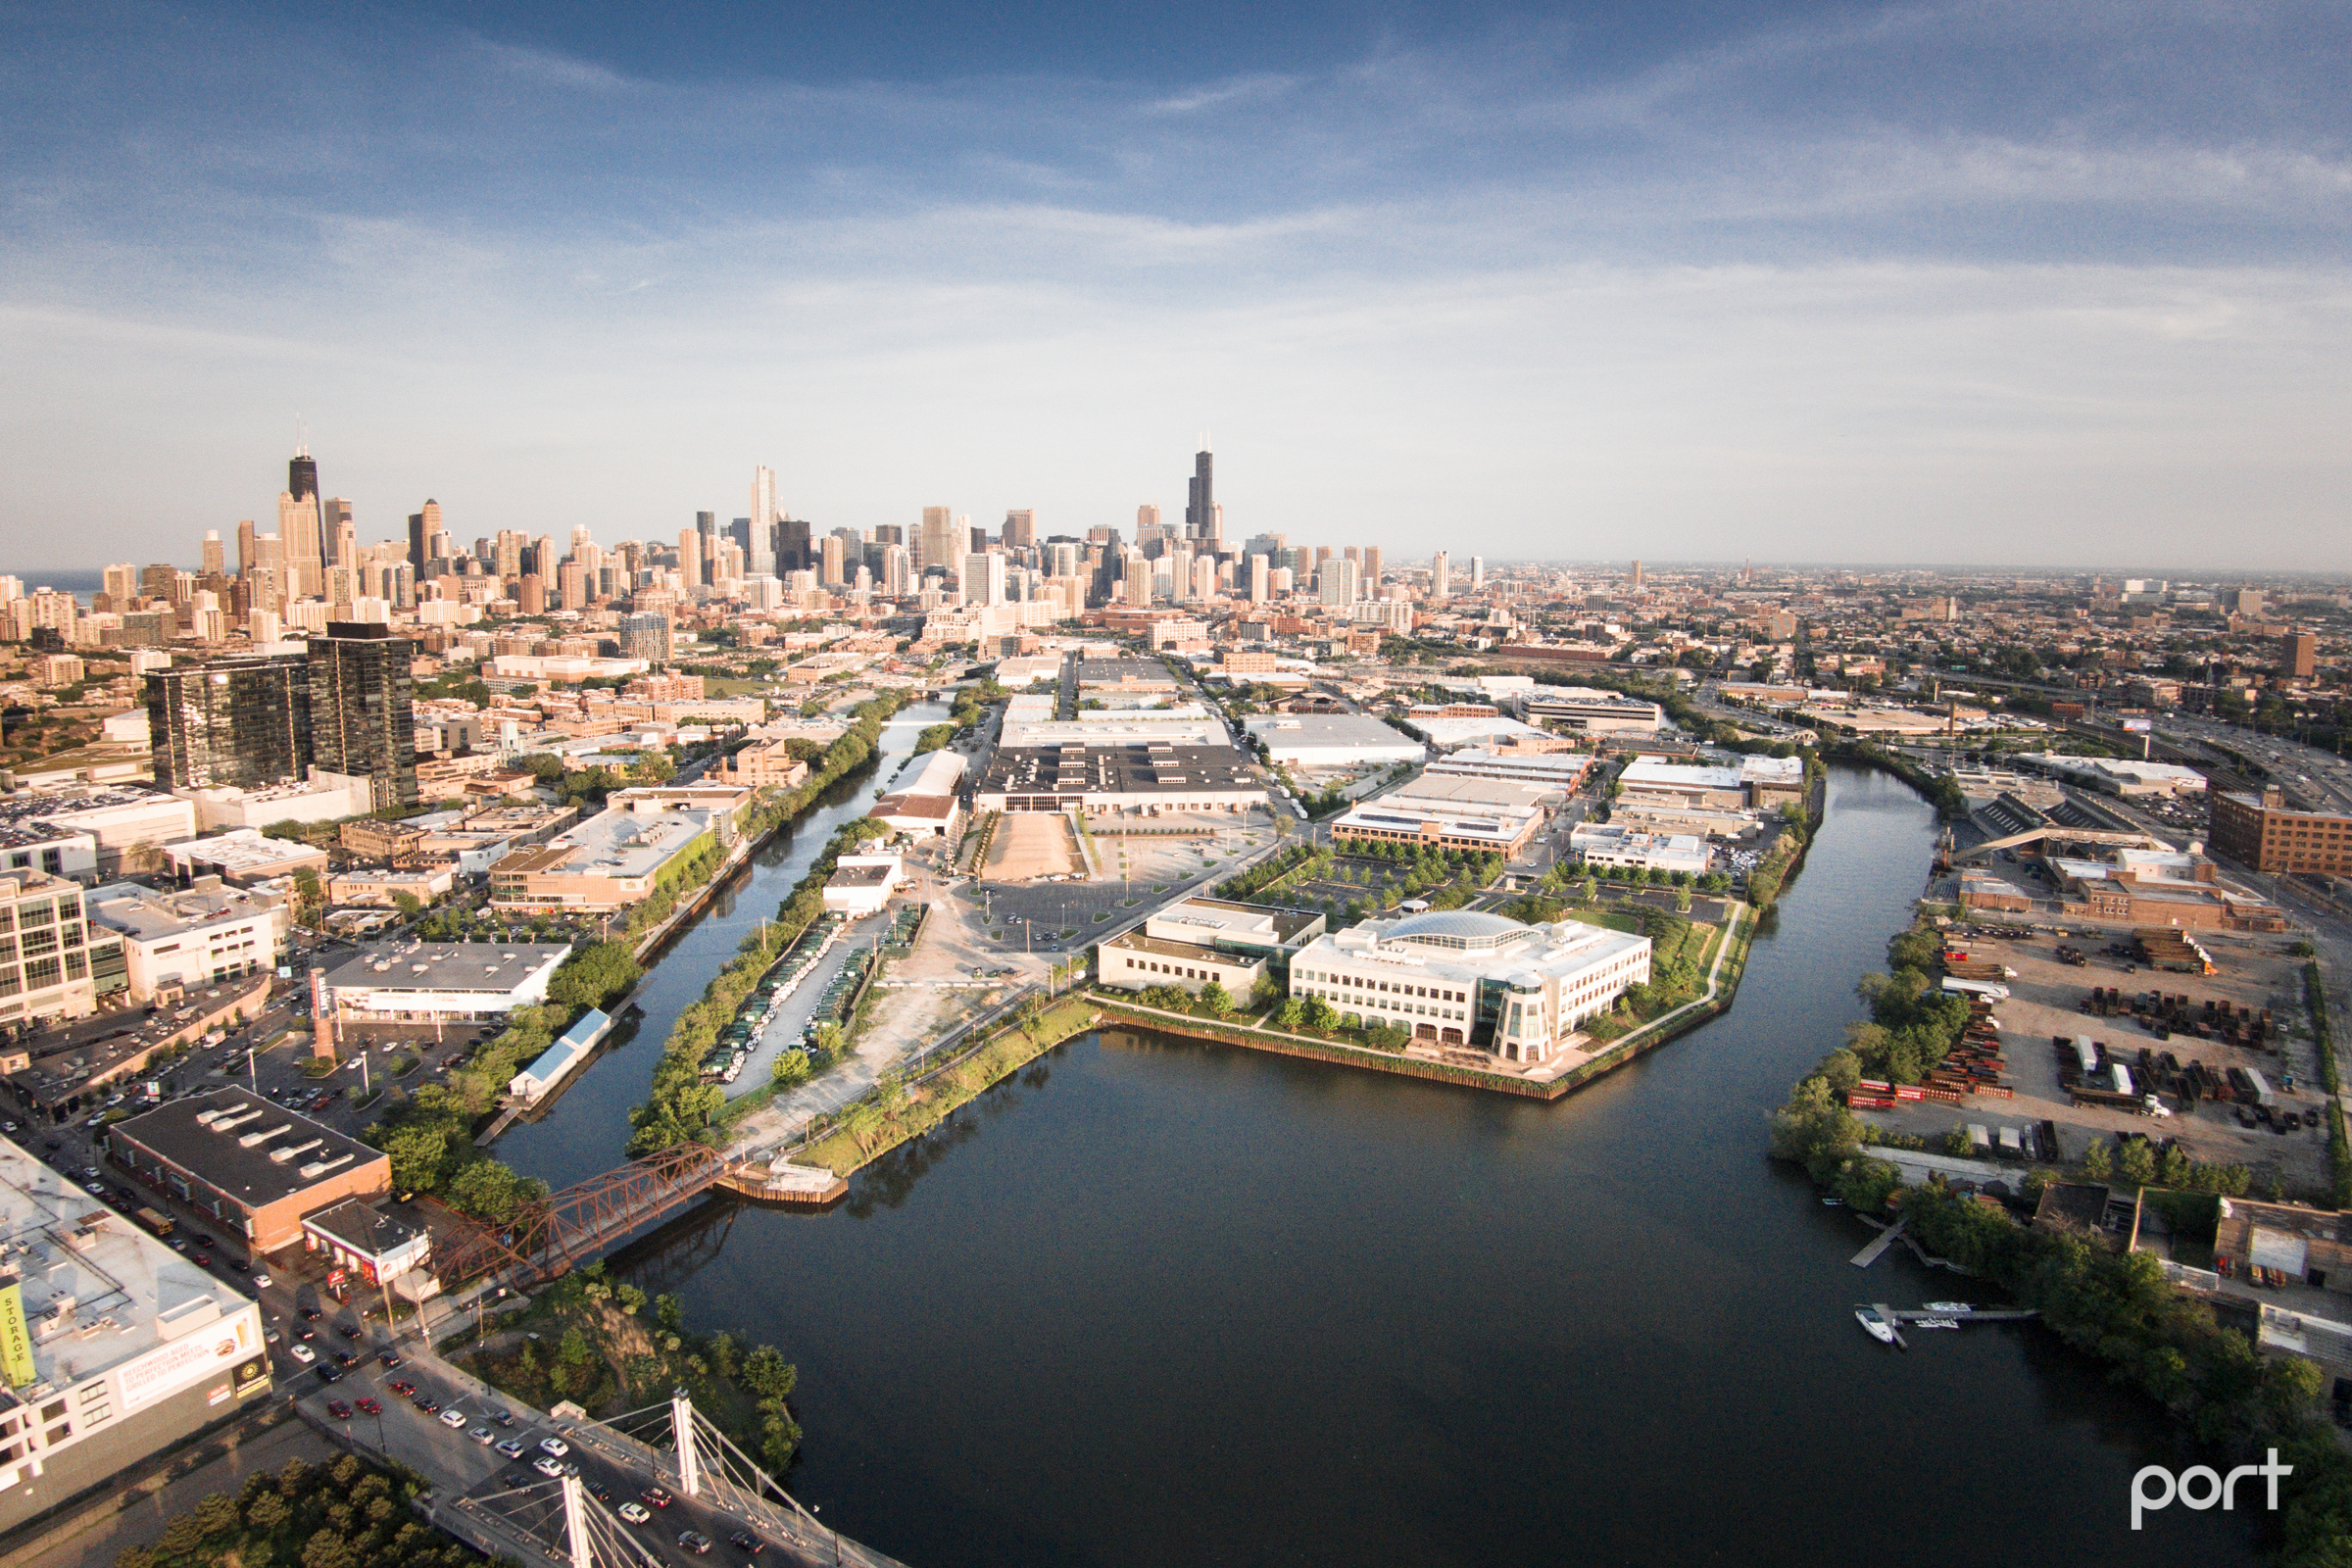 An aerial view of Goose Island